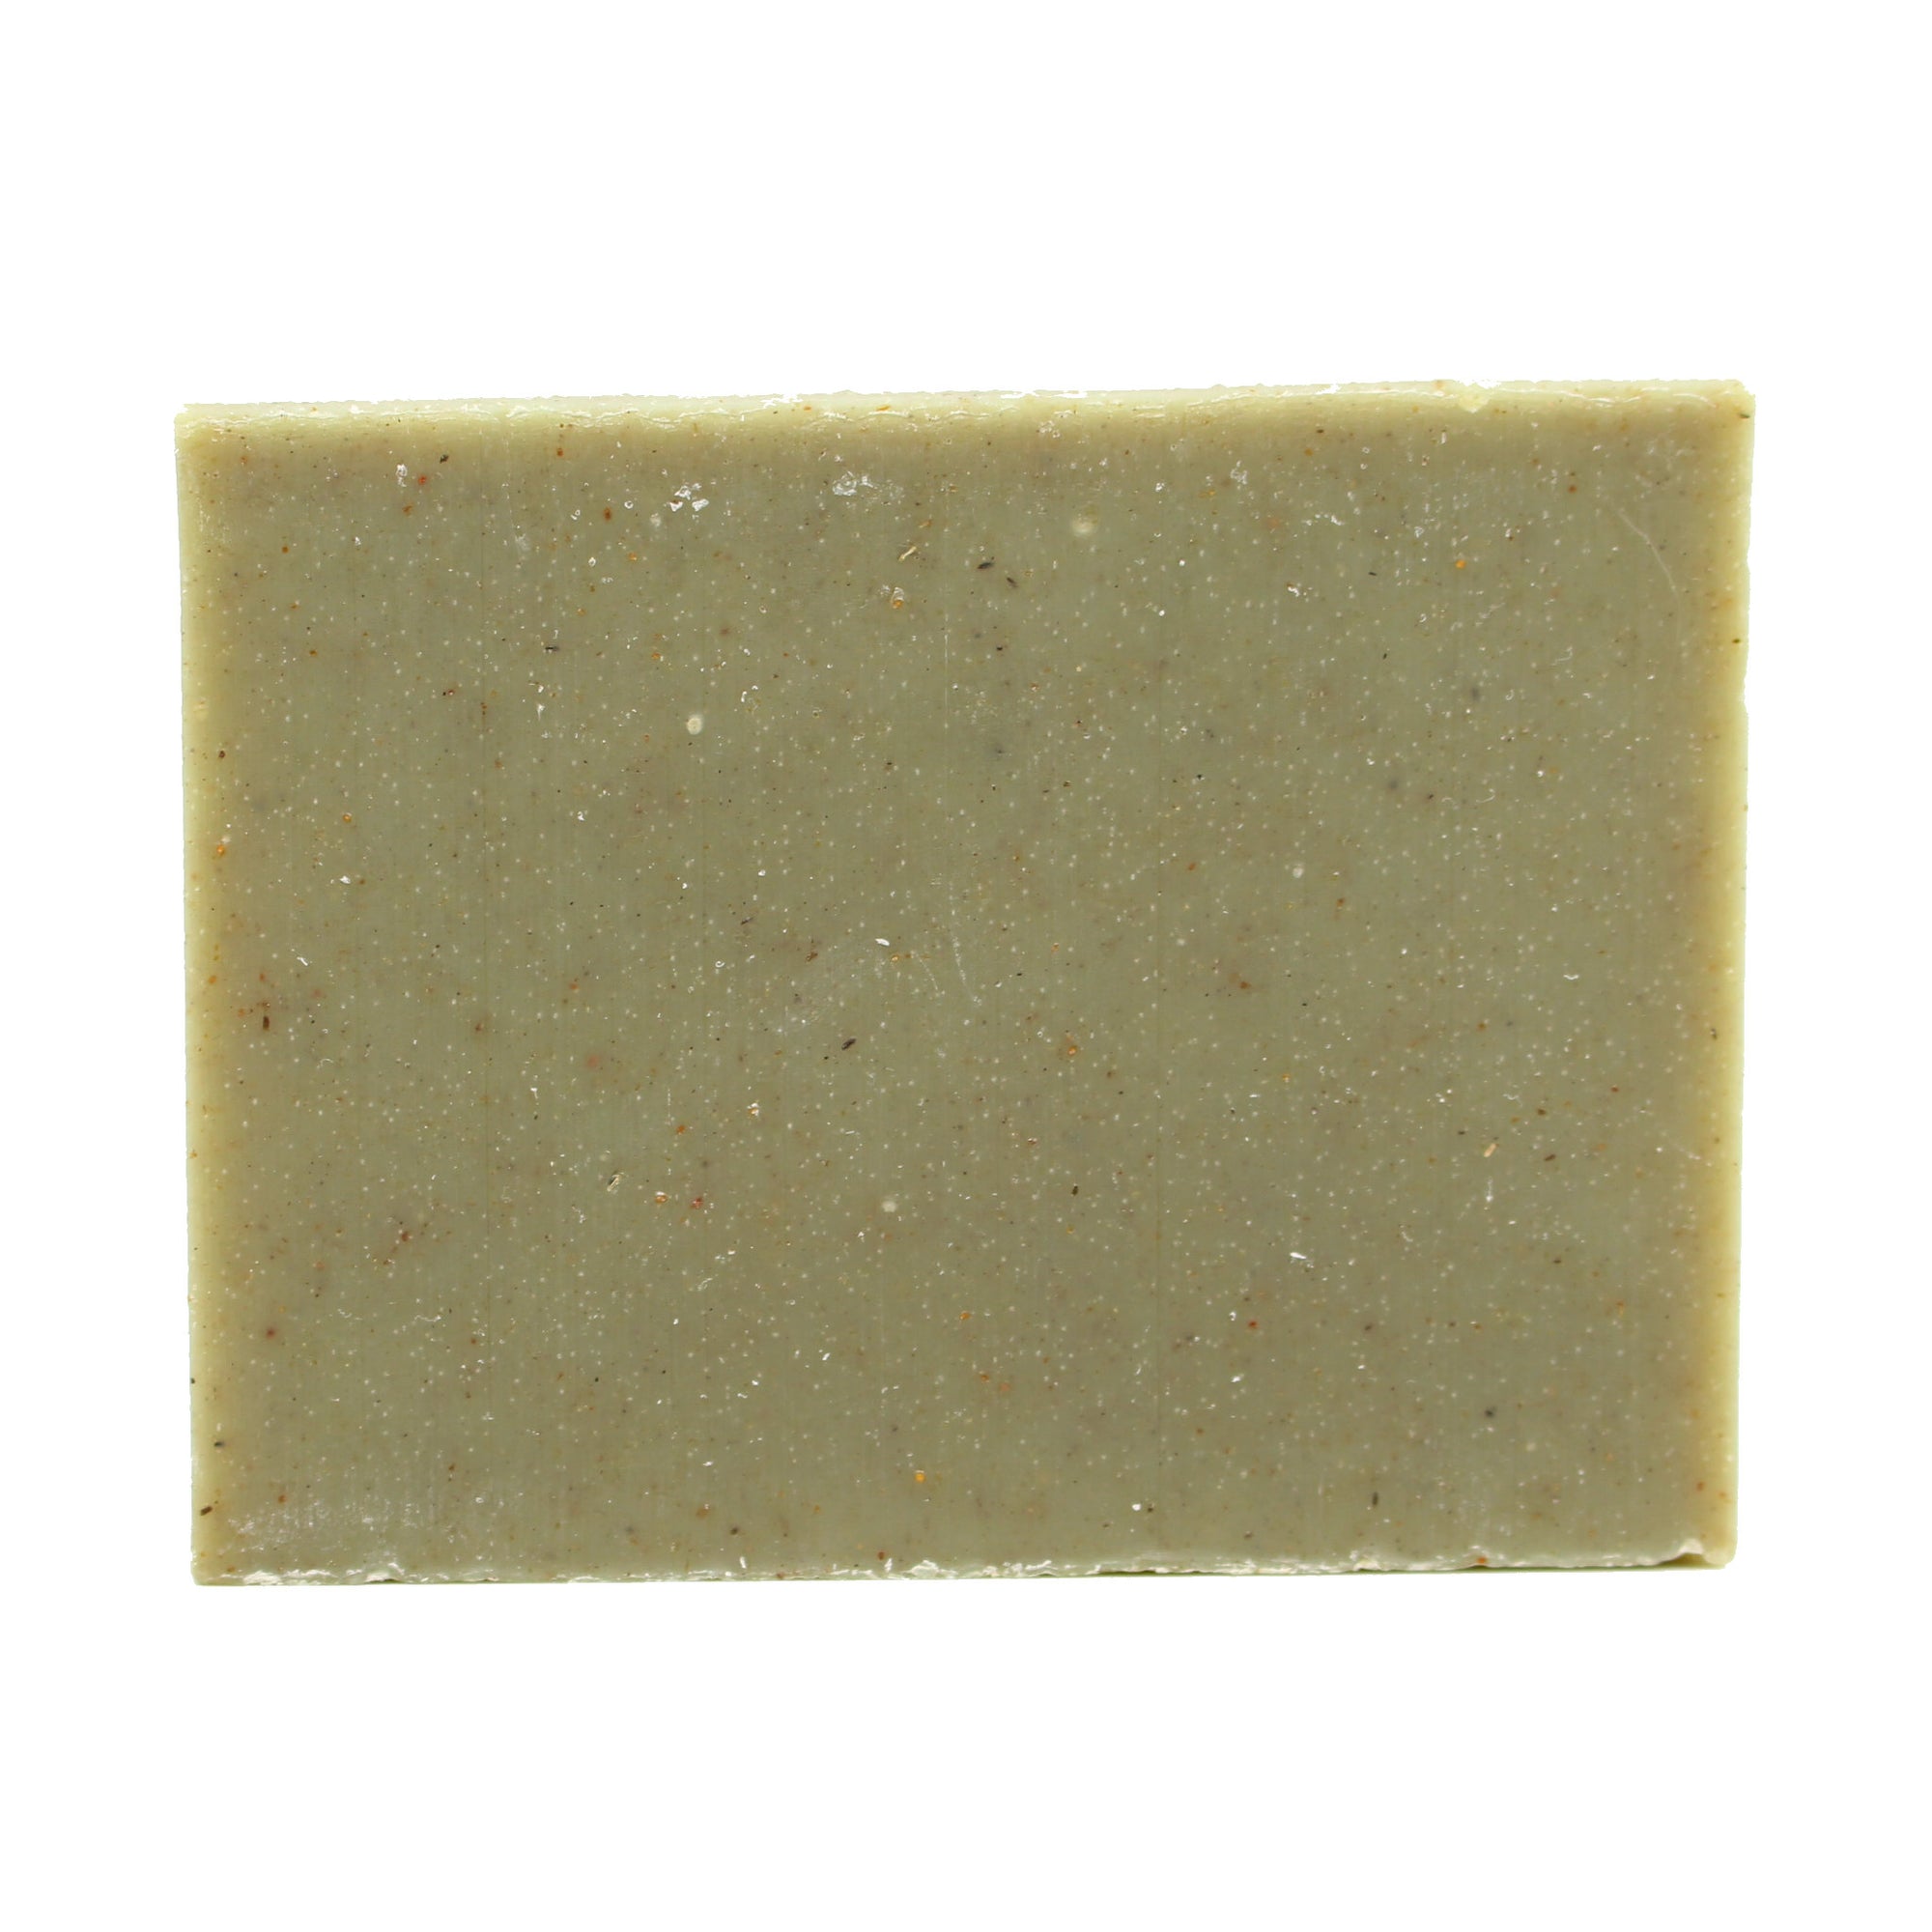 A naked bar of Grove cedar & pine essential oil and rhassoul clay organic bar soap from ground Soap.